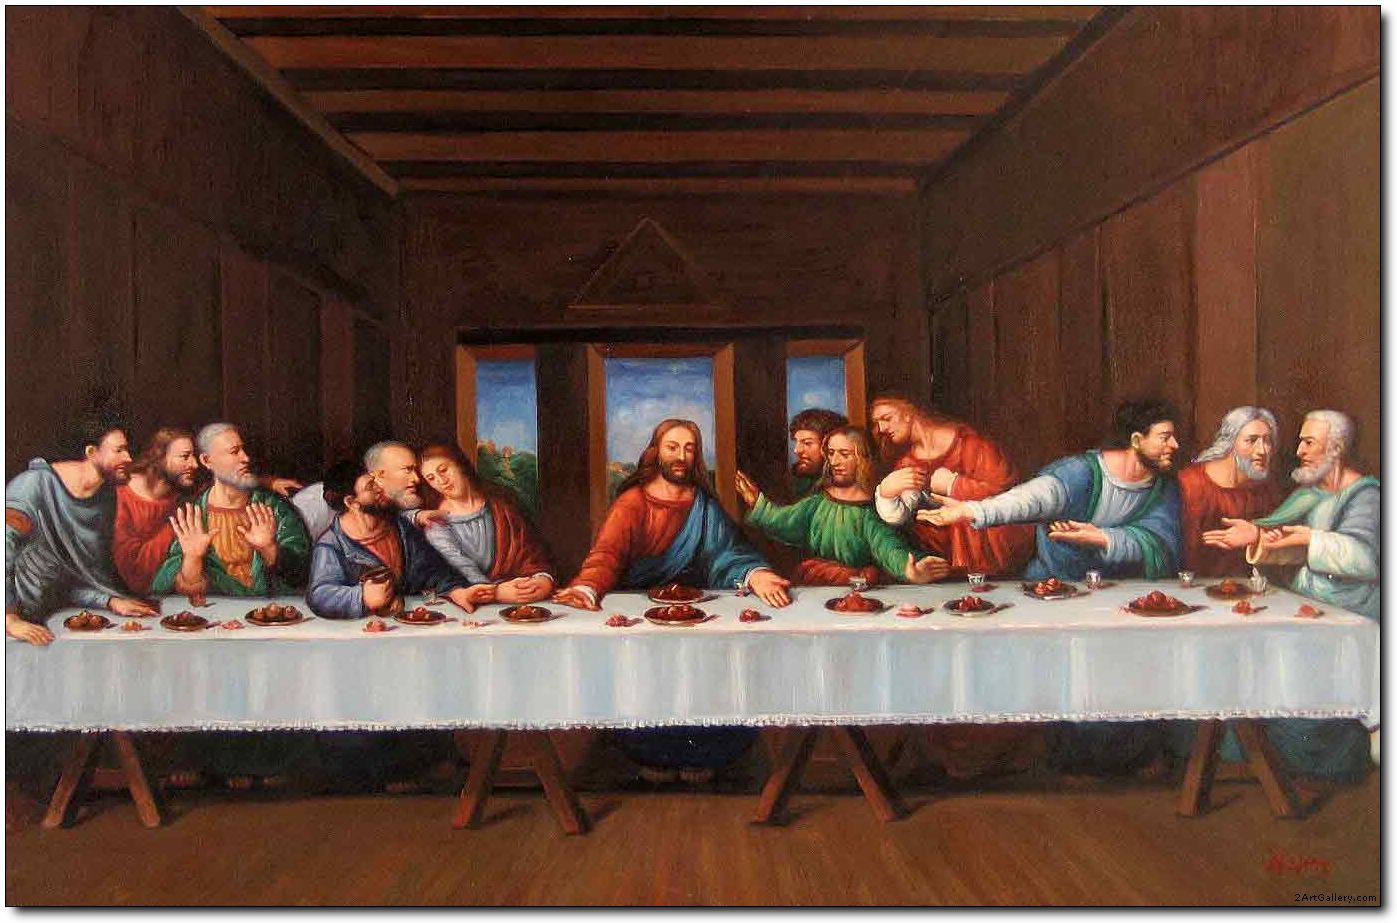 The News Track: Last Supper painting: CPM must apologise, Chief ...